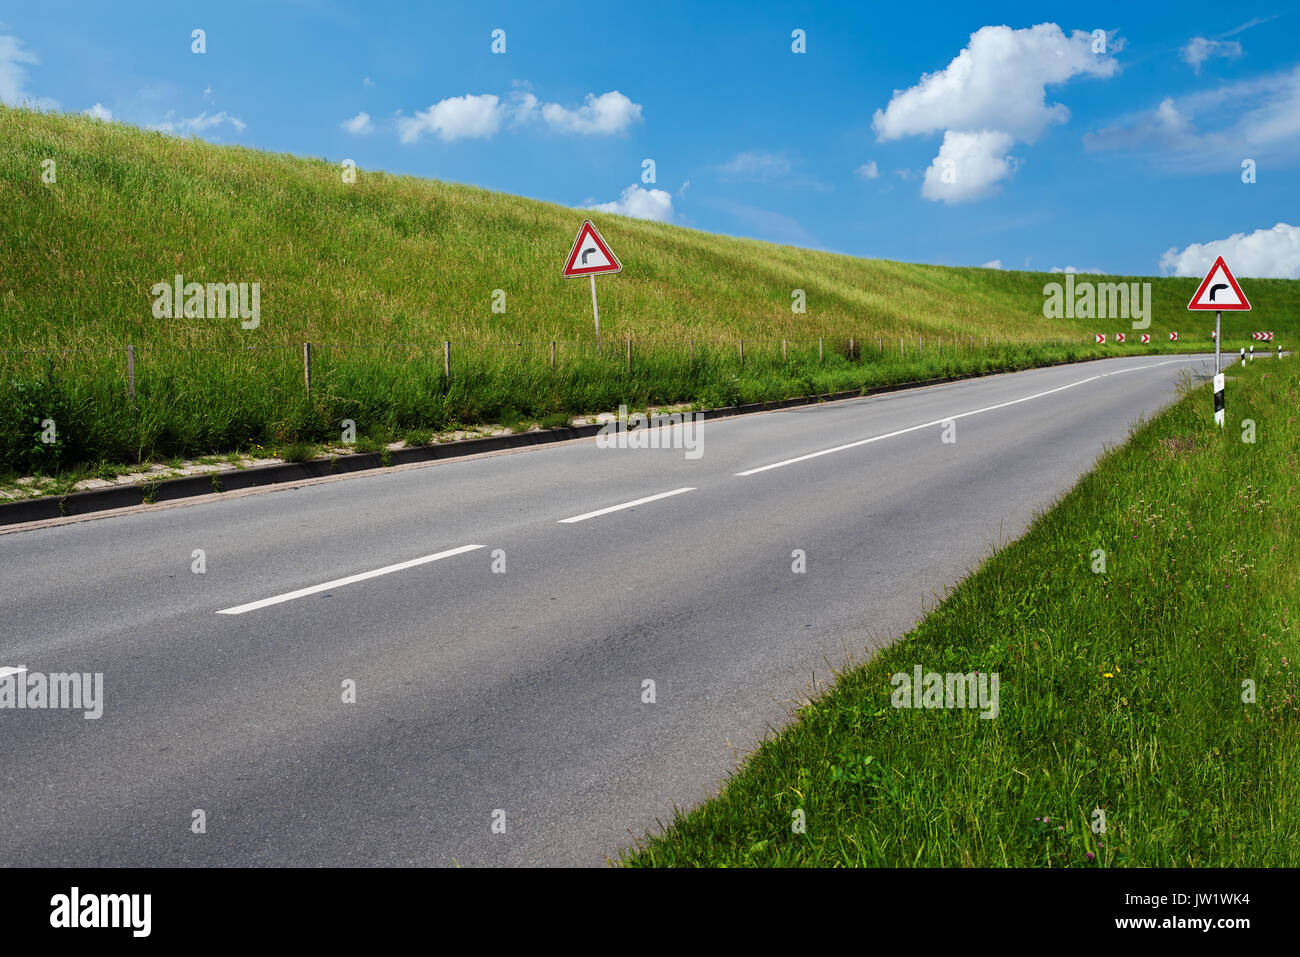 warning sign indicating sharp right curve on both sides of empty road behind a dike covered with lush green grass under blue summer sky Stock Photo